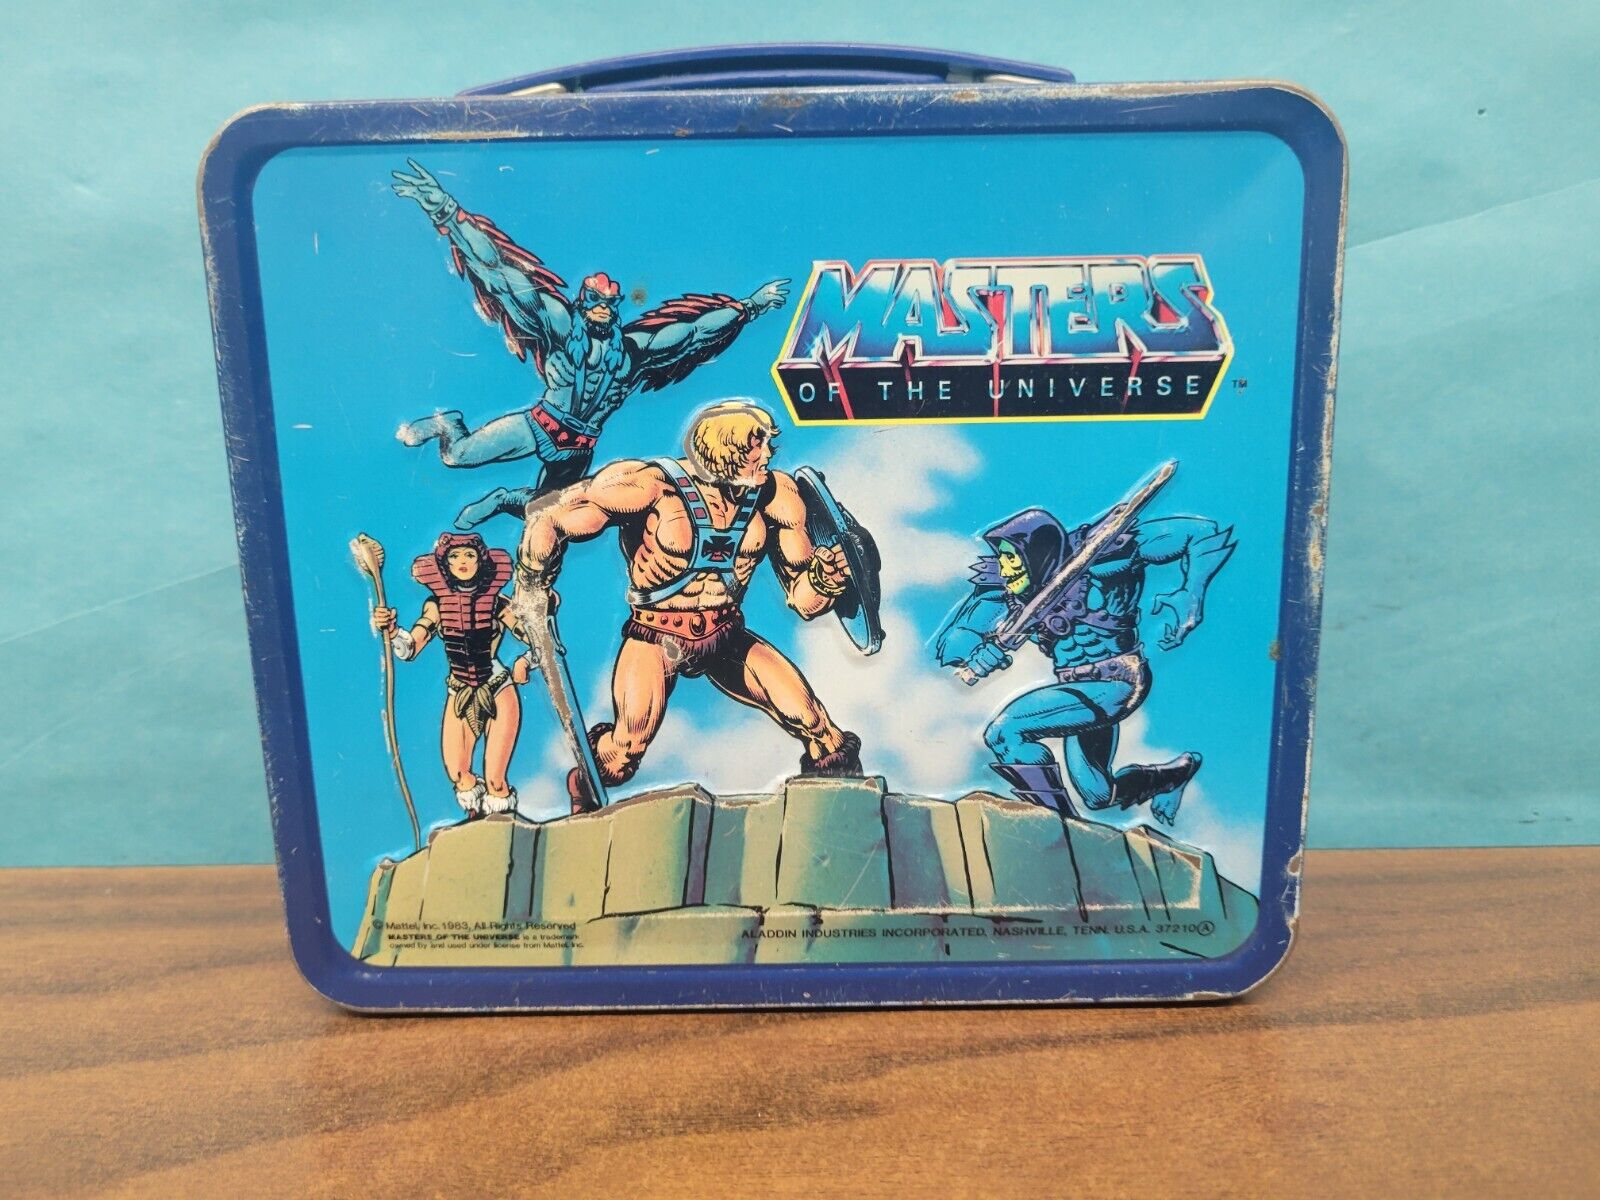 Vtg 1984 Aladdin Ind. He Man And The Masters Of The Universe Metal Lunch Box